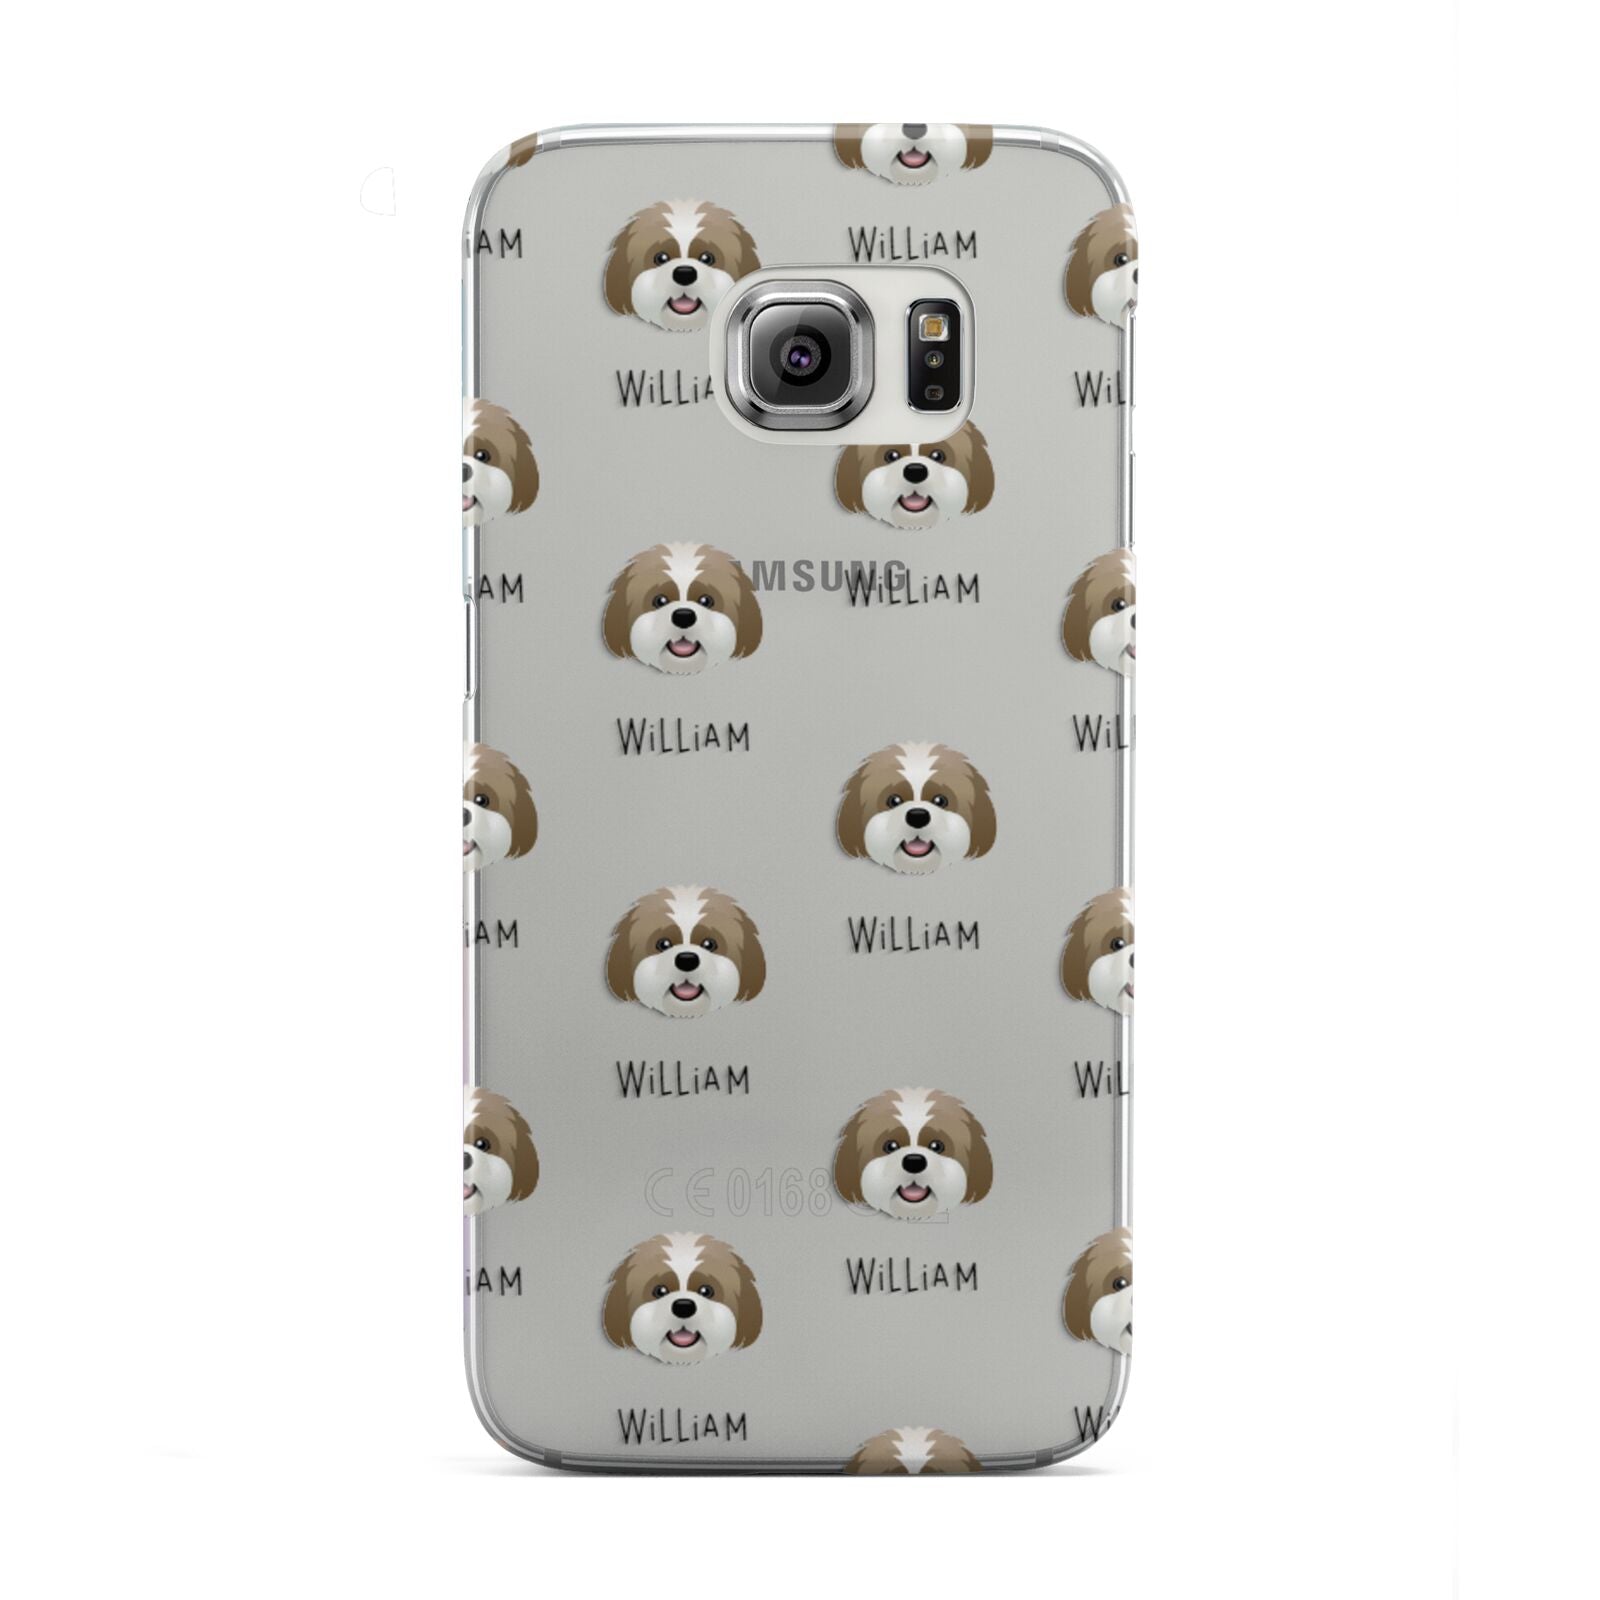 Lhatese Icon with Name Samsung Galaxy S6 Edge Case